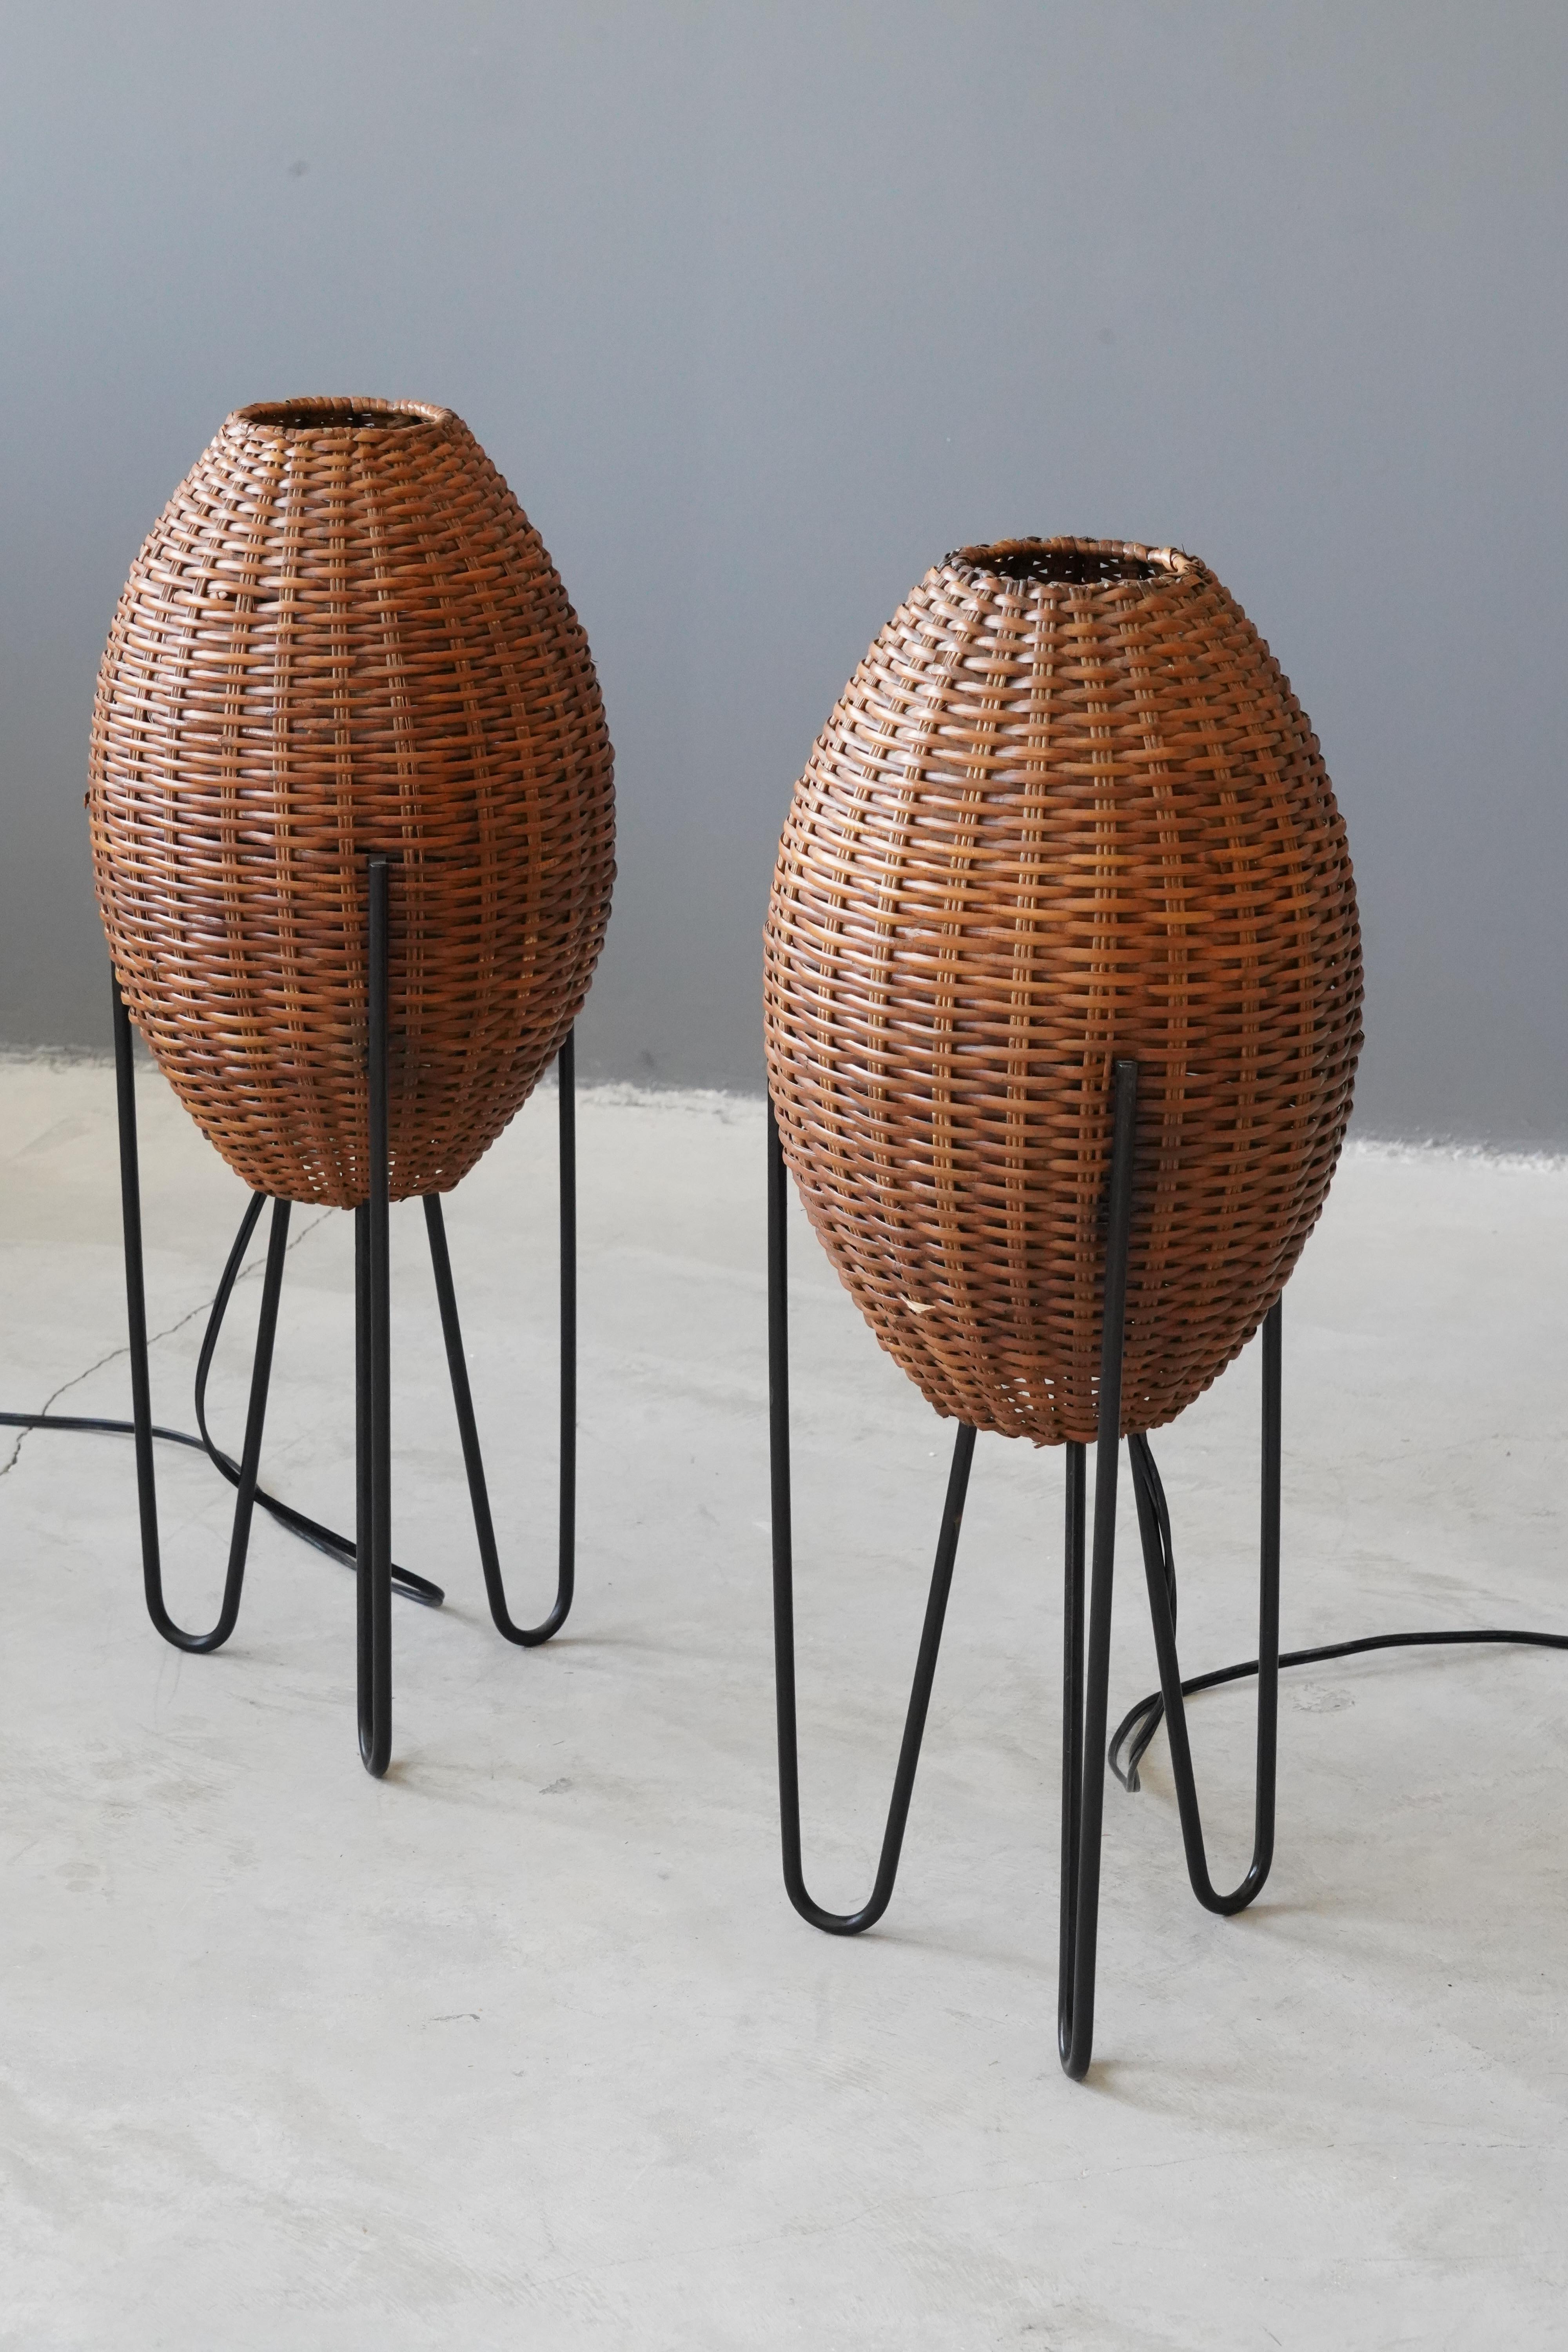 American Paul Mayén, Large Table Lamps, Wicker, Enameled Metal, United States c. 1965